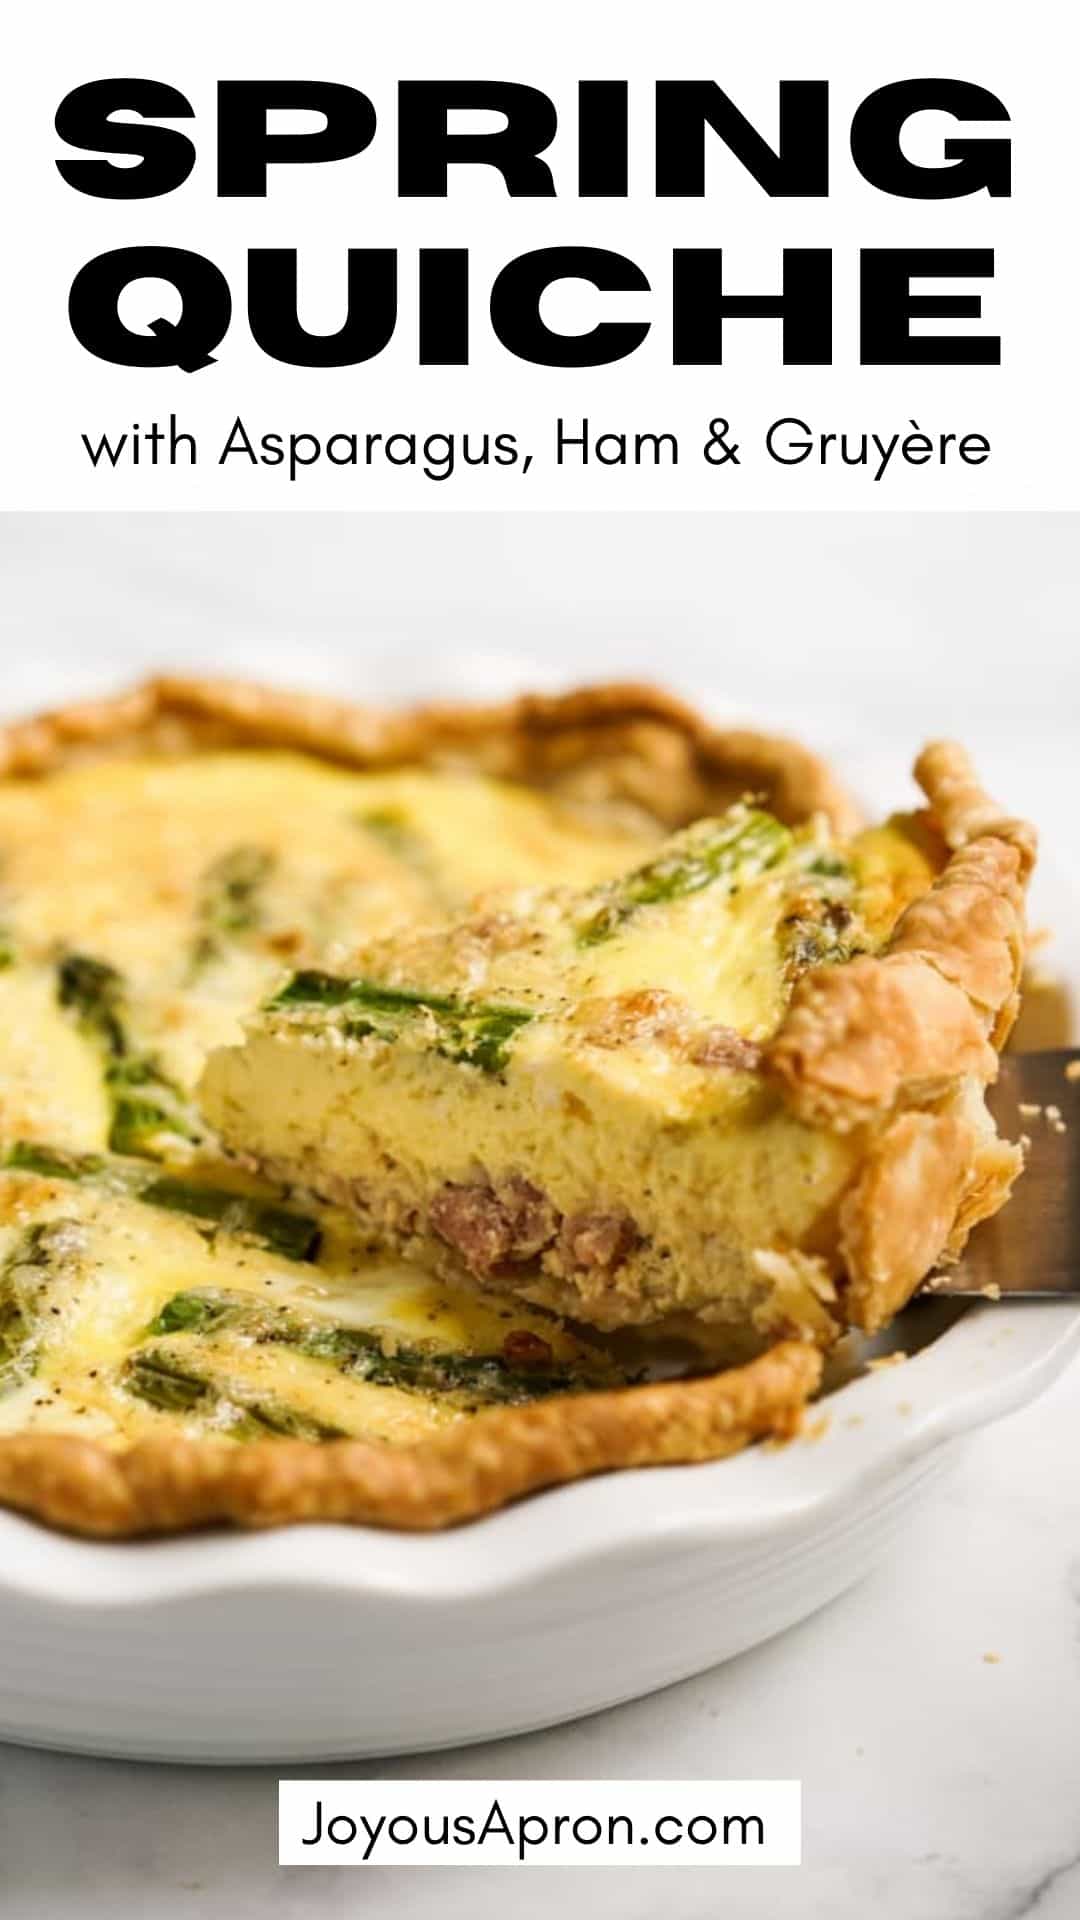 Asparagus and Ham Quiche - Great for Spring breakfast, brunch, lunch and dinner! Flaky pie crust loaded with asparagus, ham, gruyere cheese and egg mixture, baked to perfection! via @joyousapron